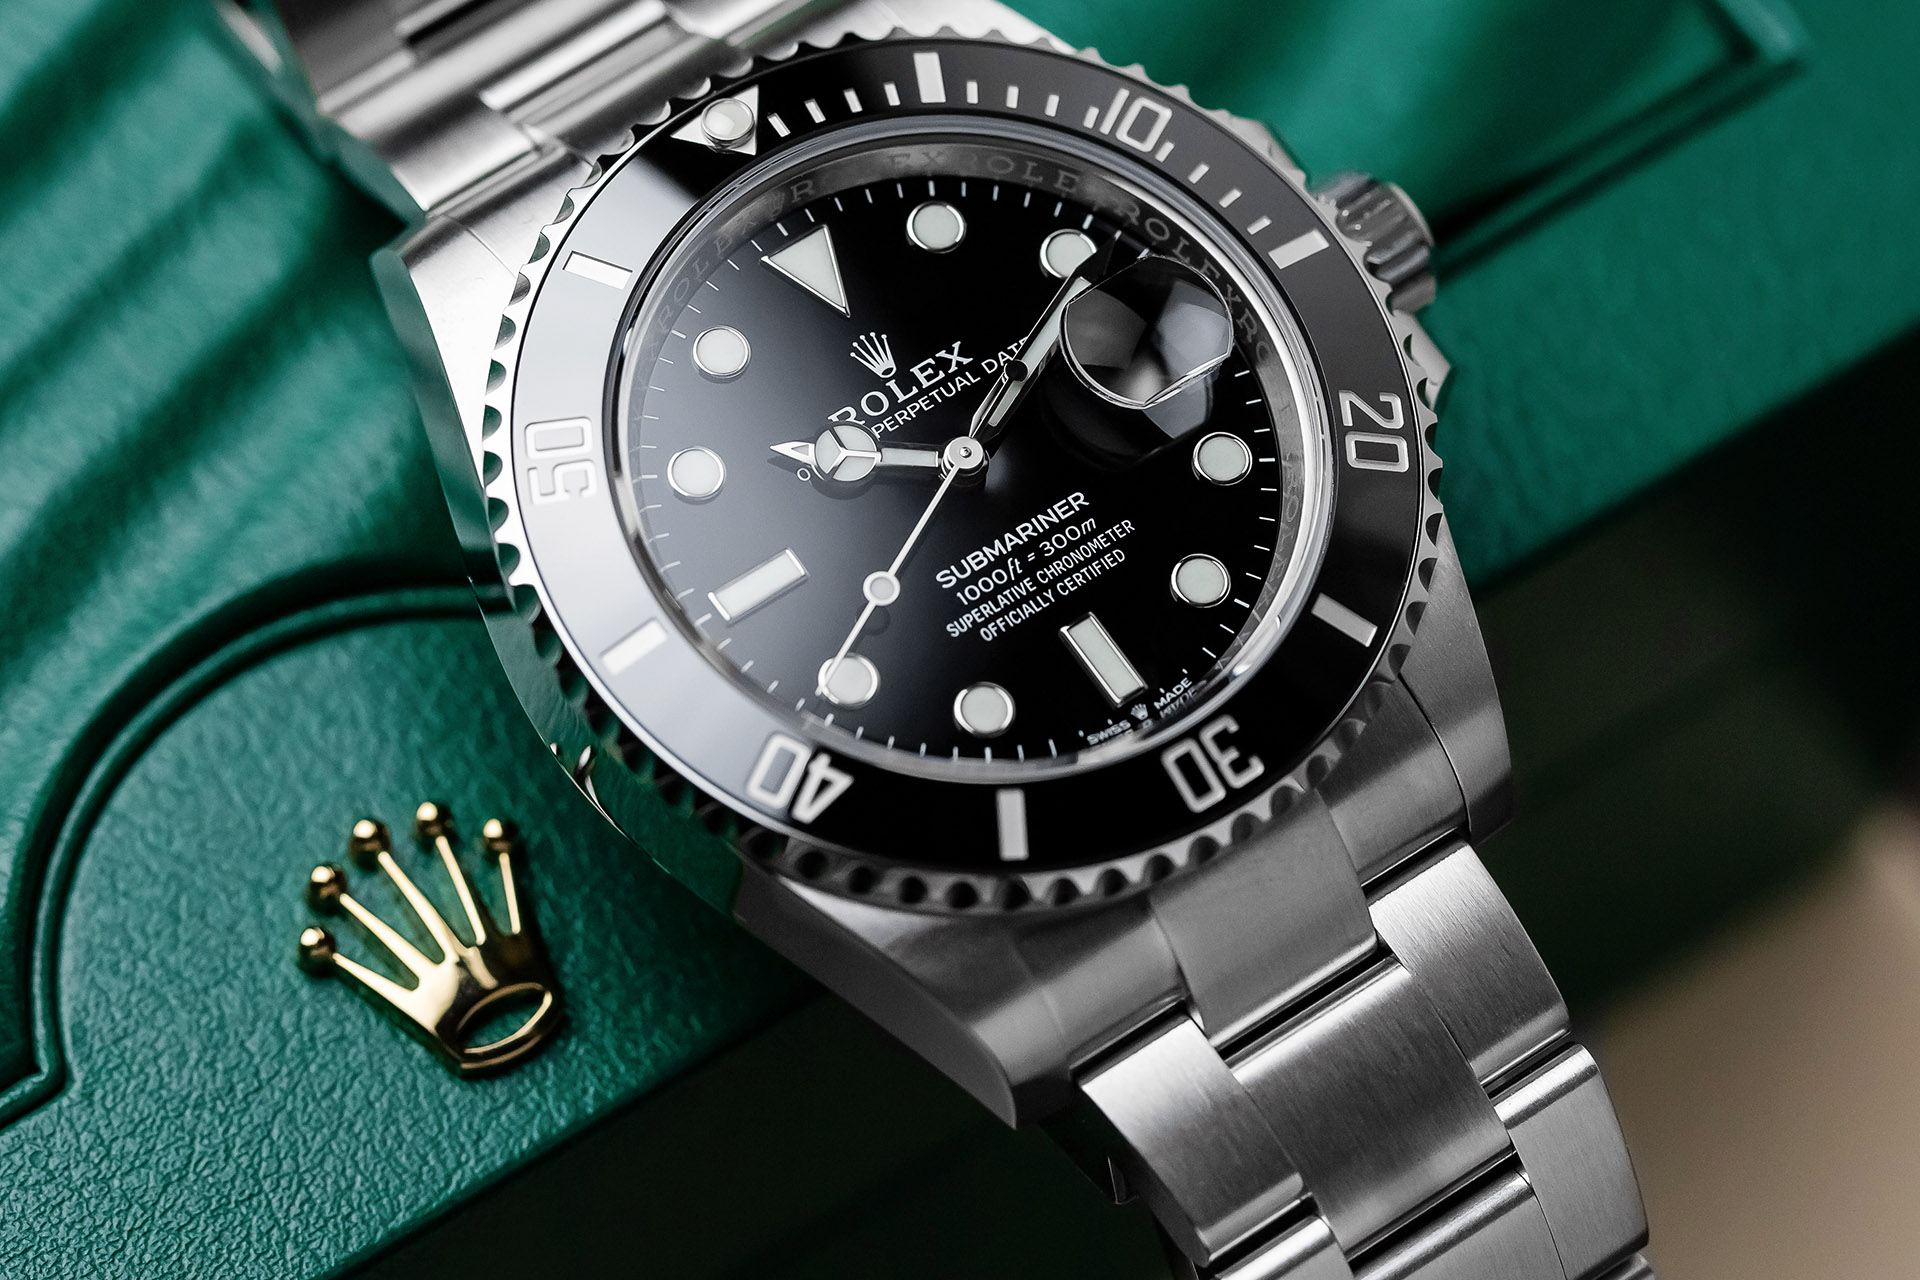 White Dial Rolex Watches | The Watch Club by SwissWatchExpo